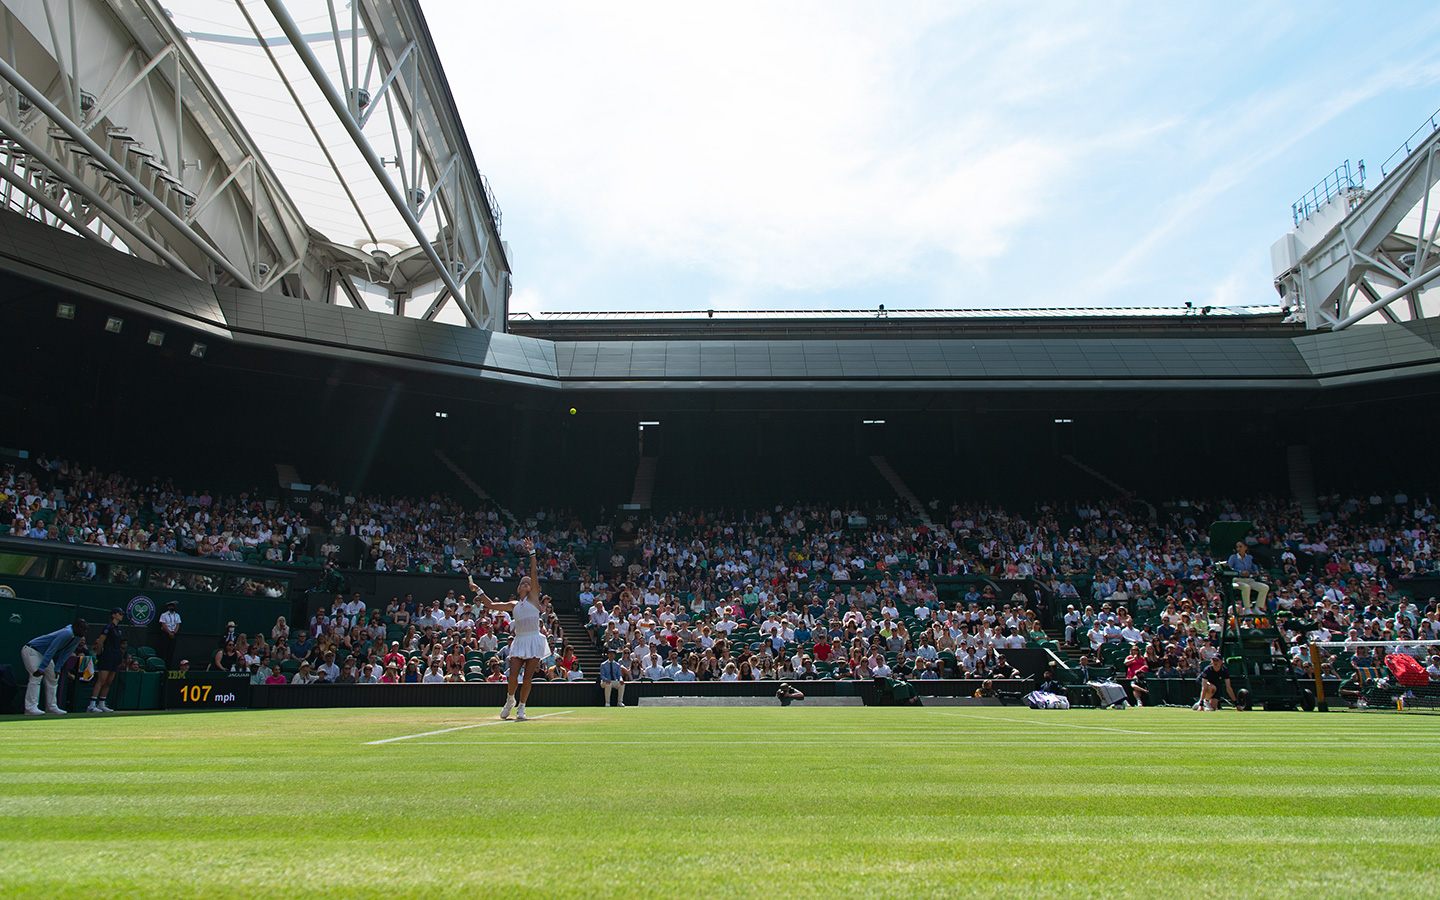 Centre Court at the All England Lawn Tennis and Croquet Club